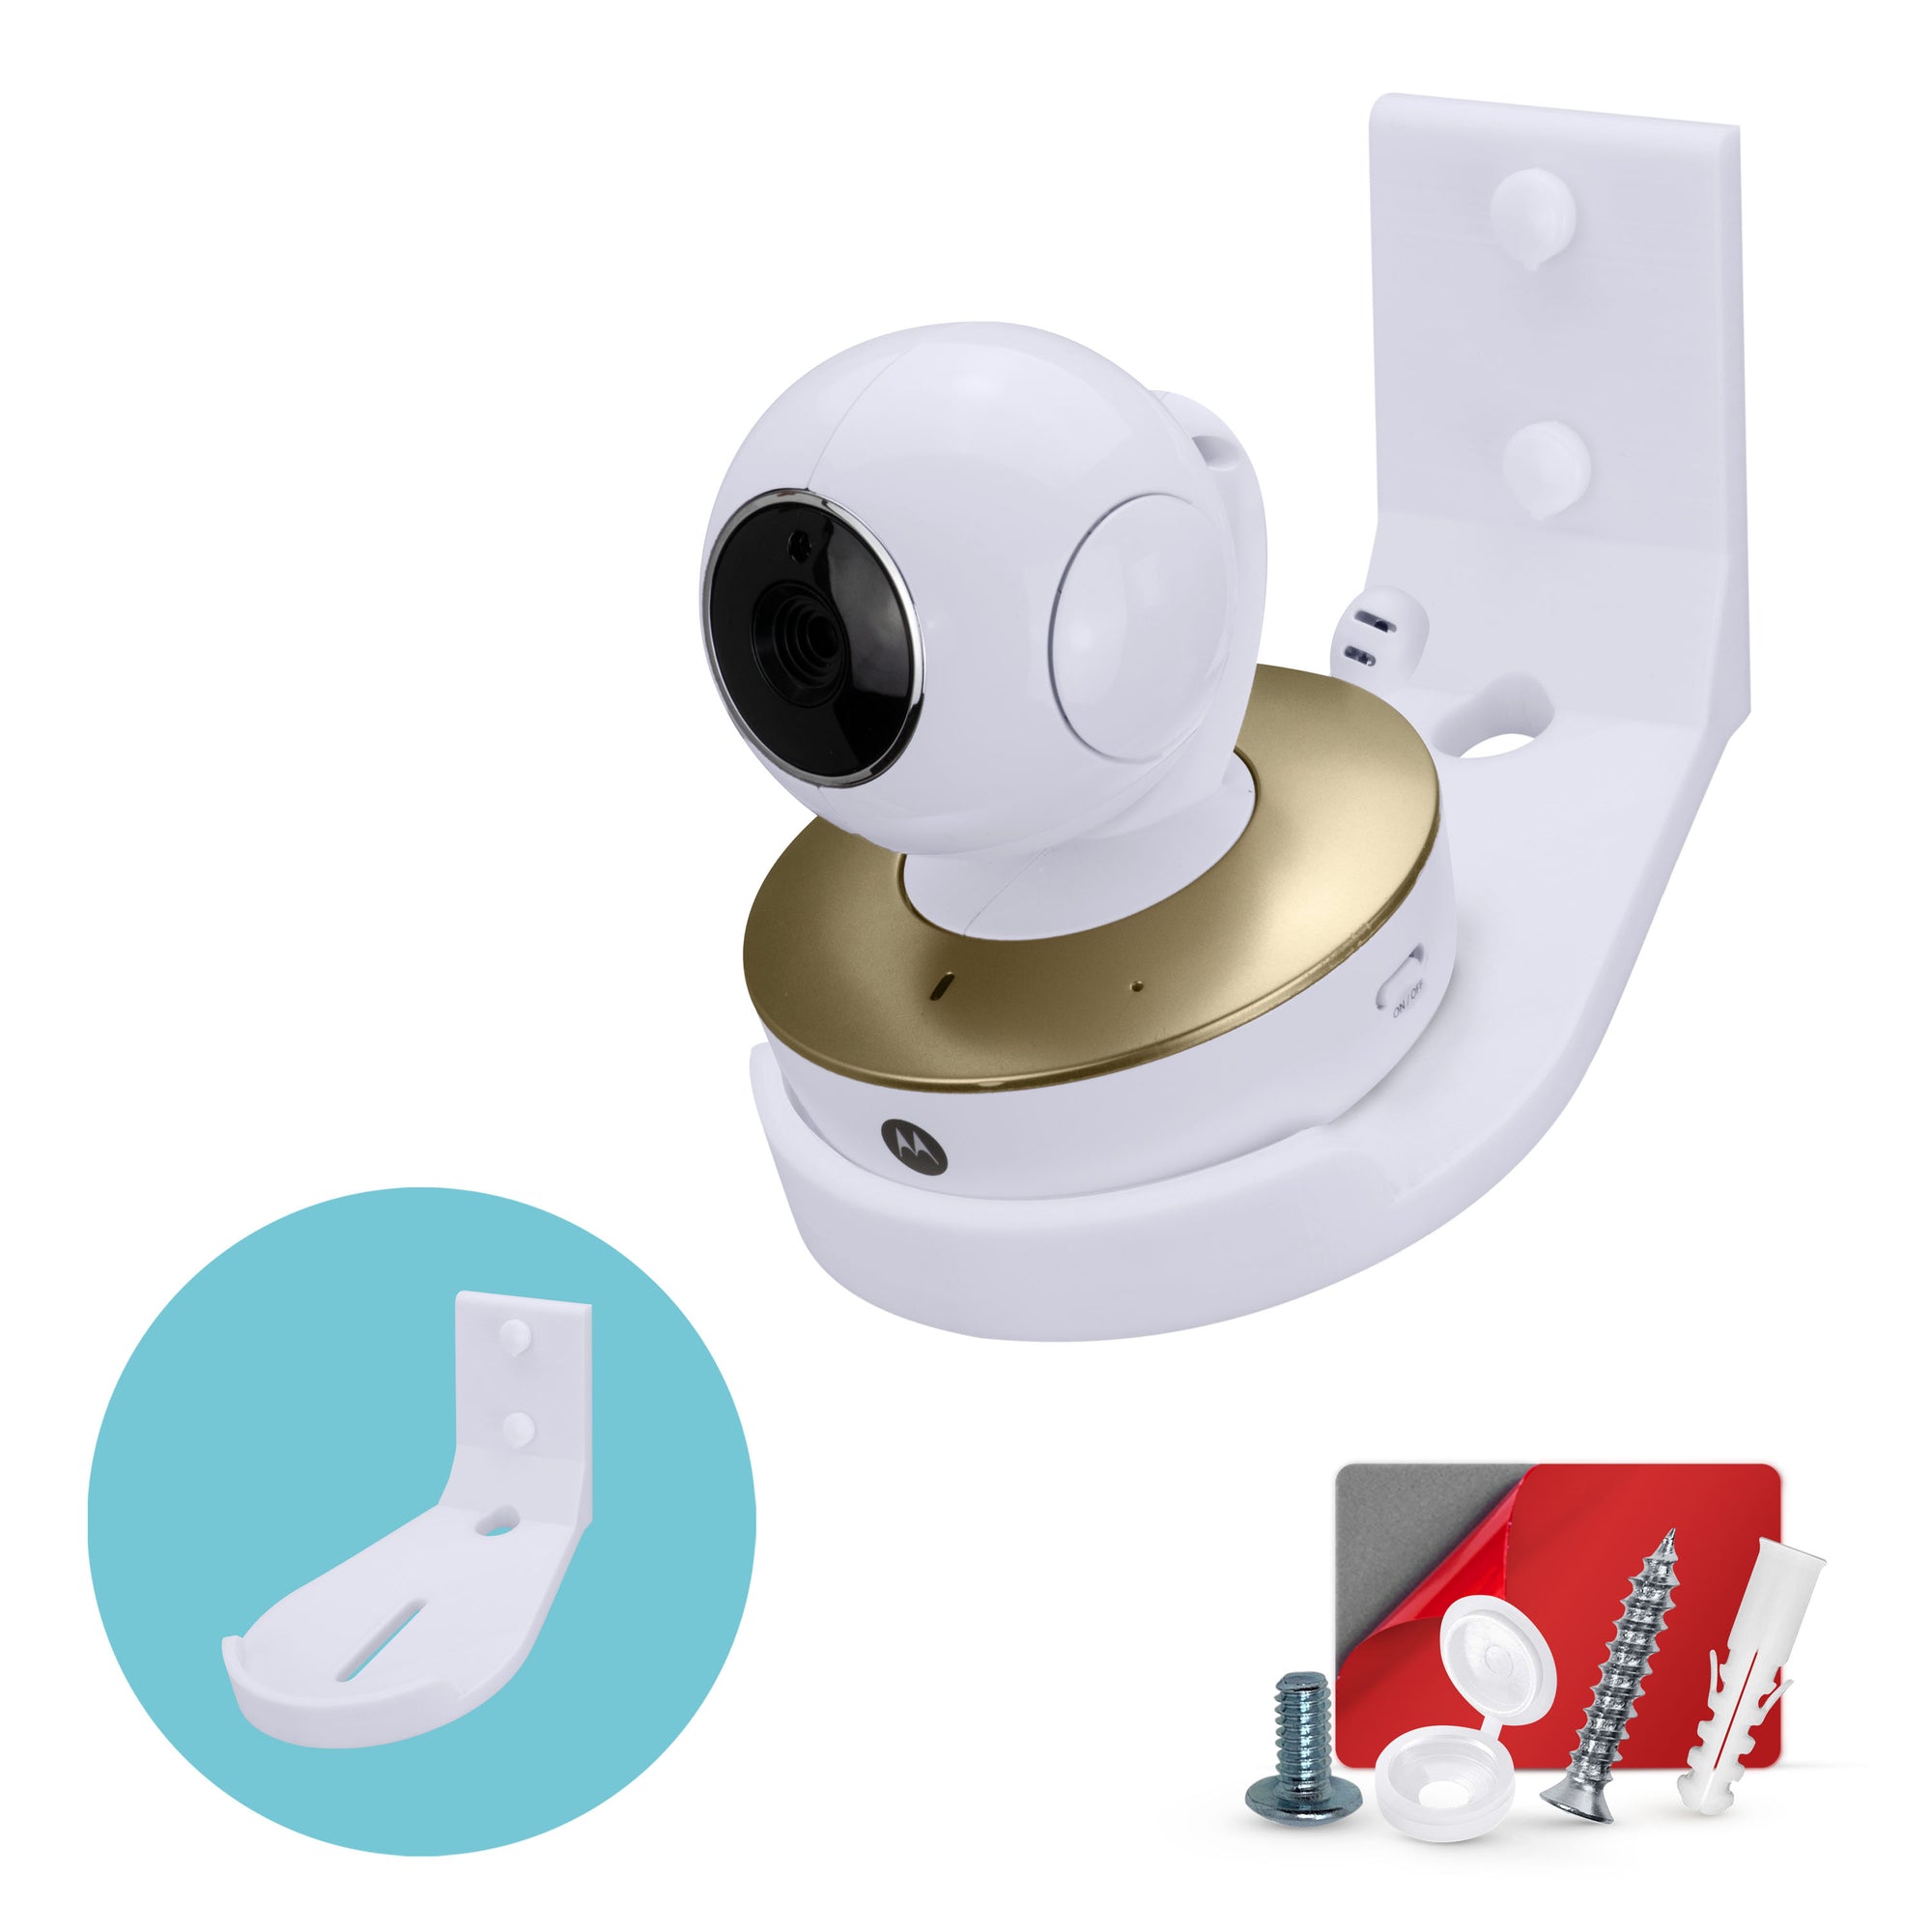 Tilted Baby Monitor & Security Camera Wall Mount Holder for Eufy, Wyze, Wansview, Blink, TP Link, Ring & More - Adhesive & Screw-In Mounting, Easy to Install Holder Bracket, Reduce Blind Spots & Clutter (W07)